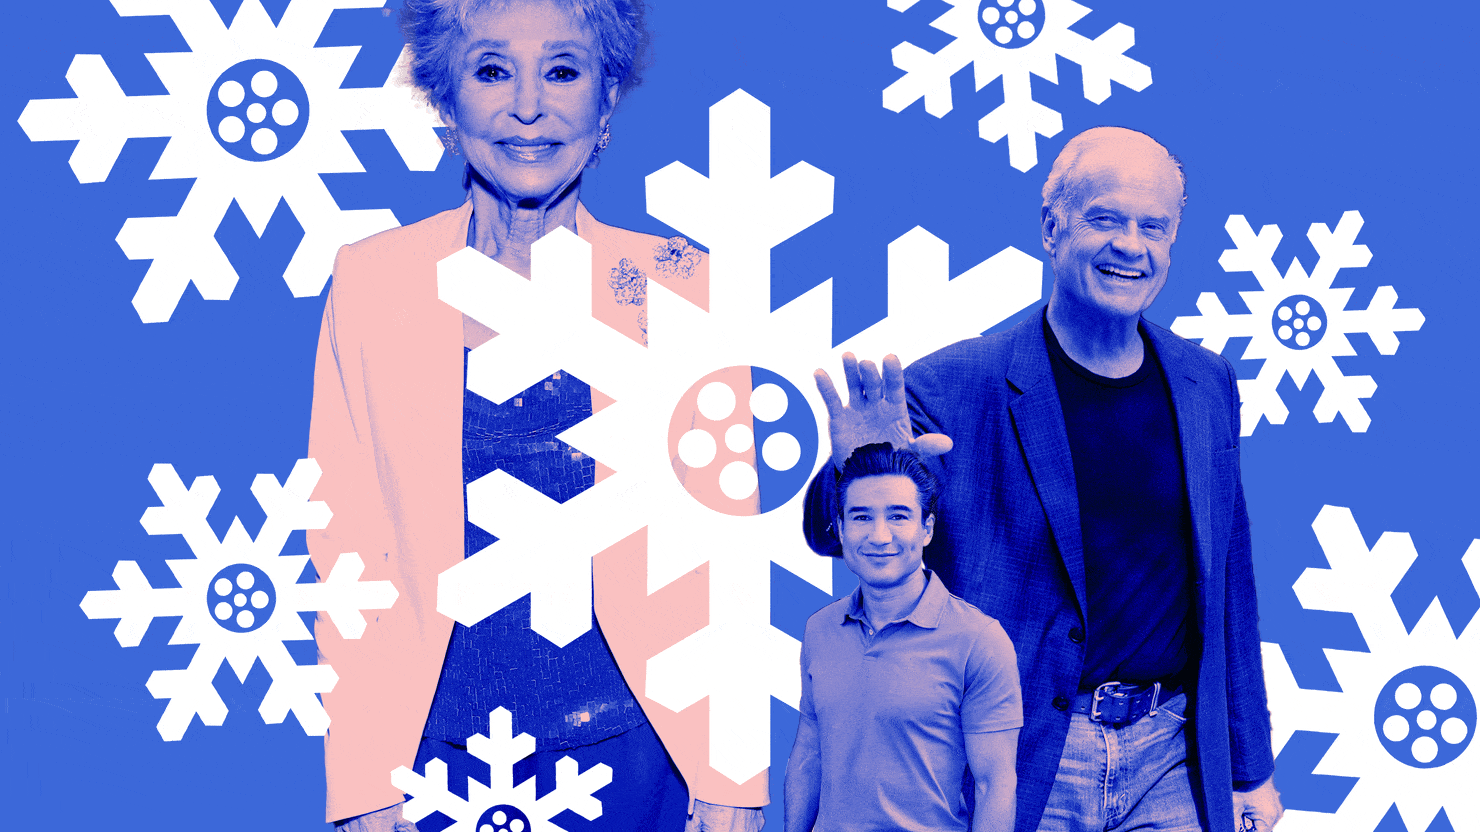 Lifetime Holiday Movies and the Celebs Who Can't Stop Making Them - The Daily Beast